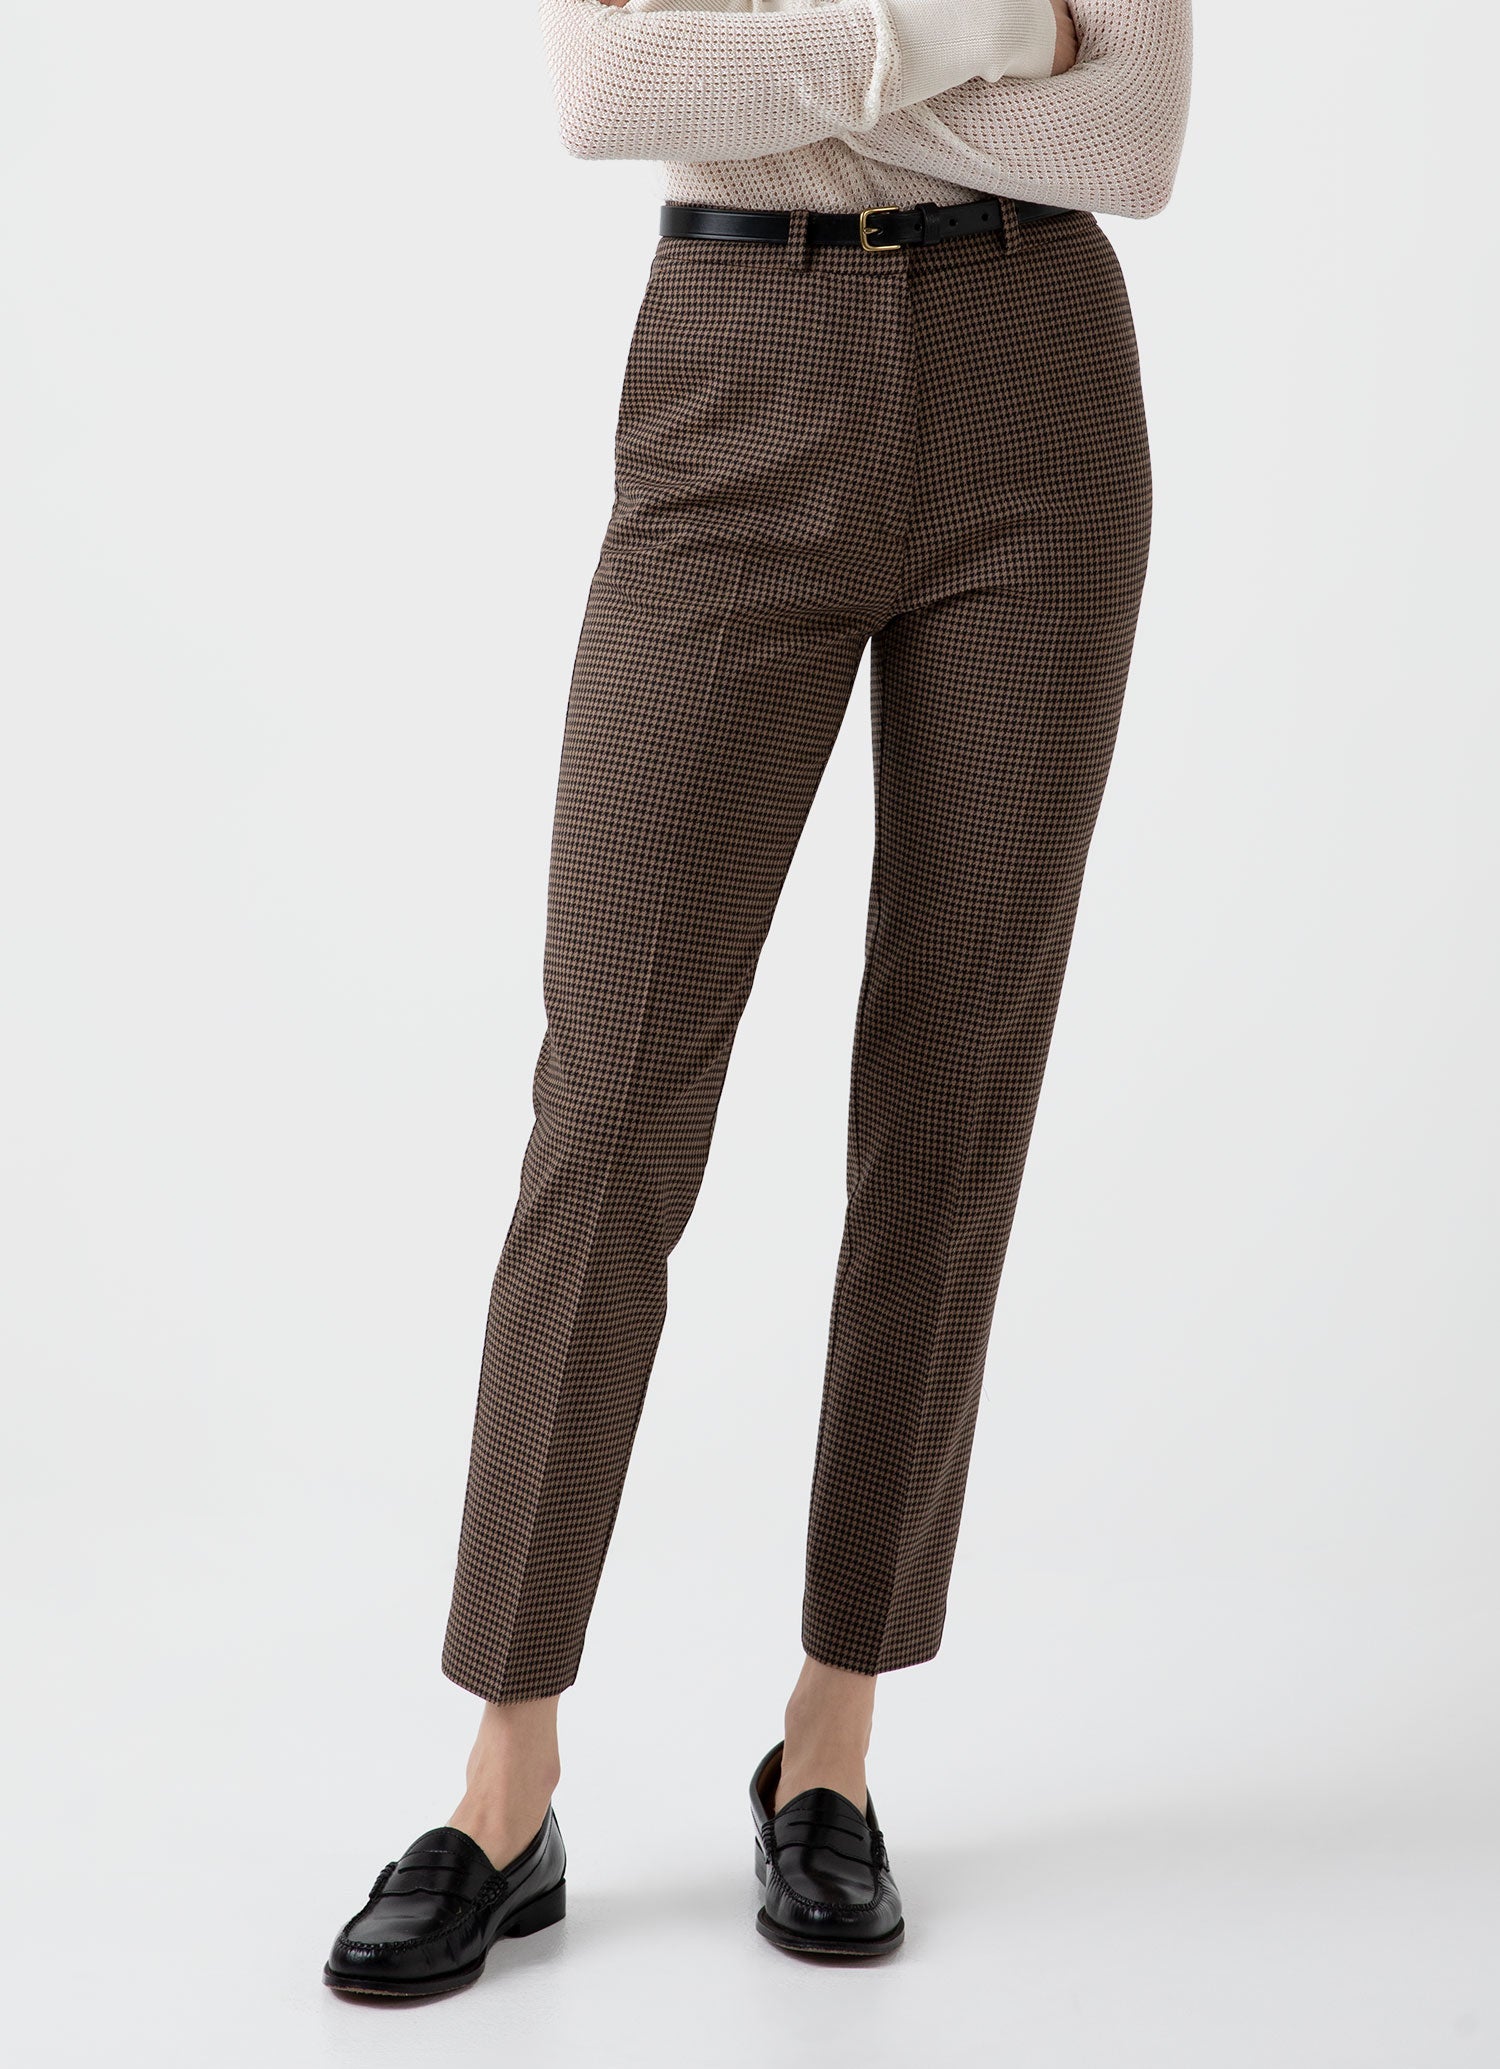 Women's Edie Campbell Tapered Trouser in Black/Tan Check